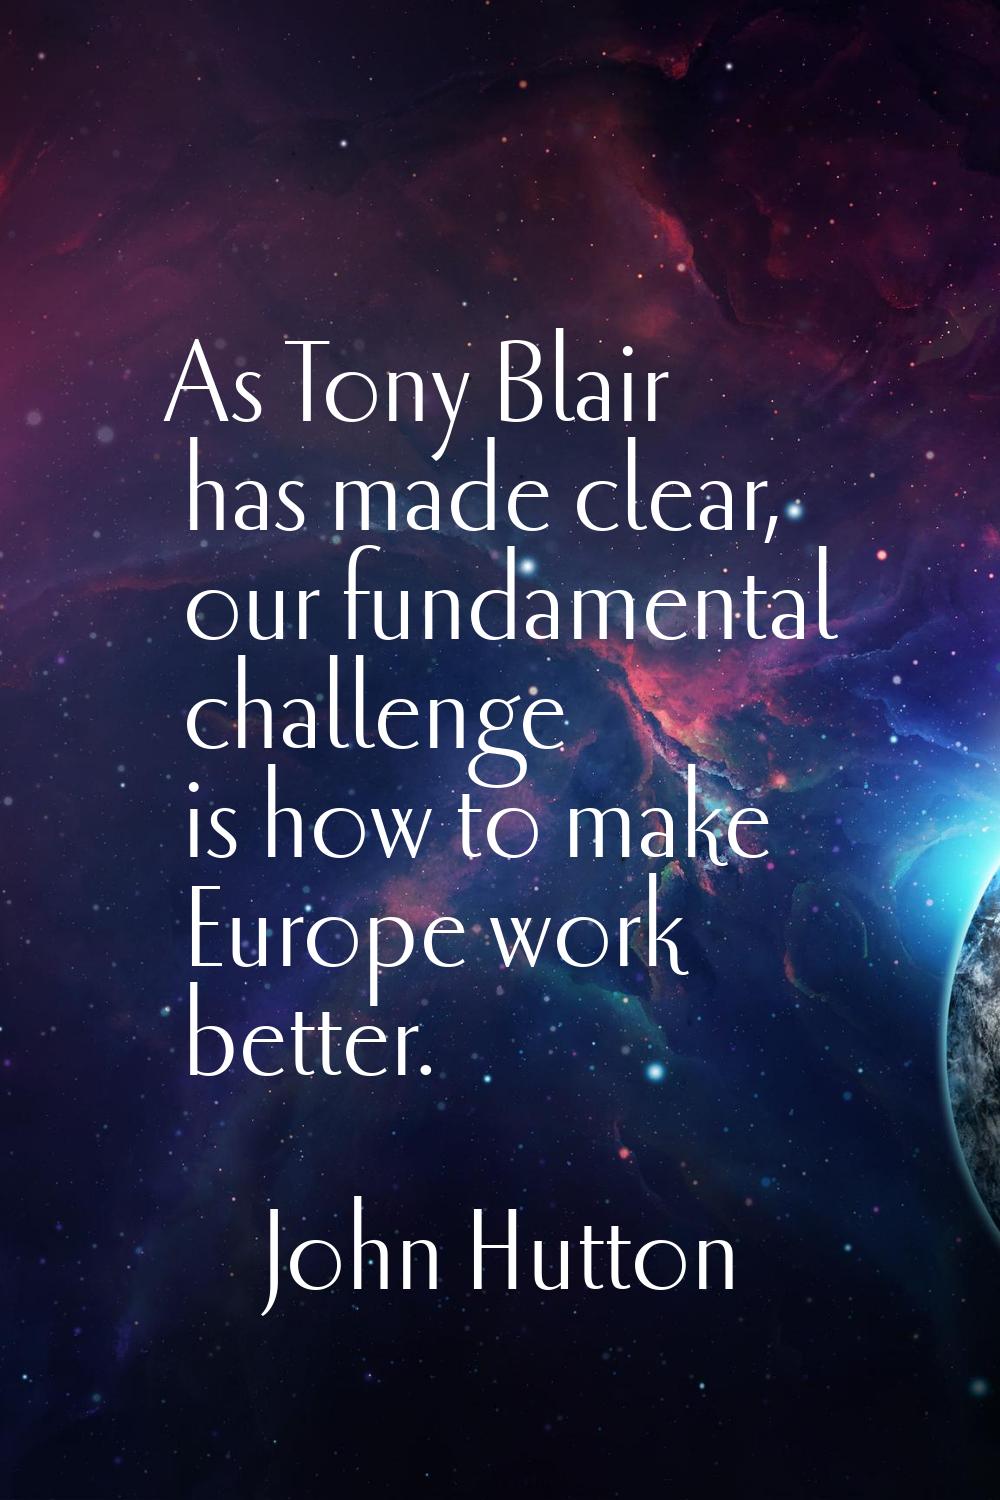 As Tony Blair has made clear, our fundamental challenge is how to make Europe work better.